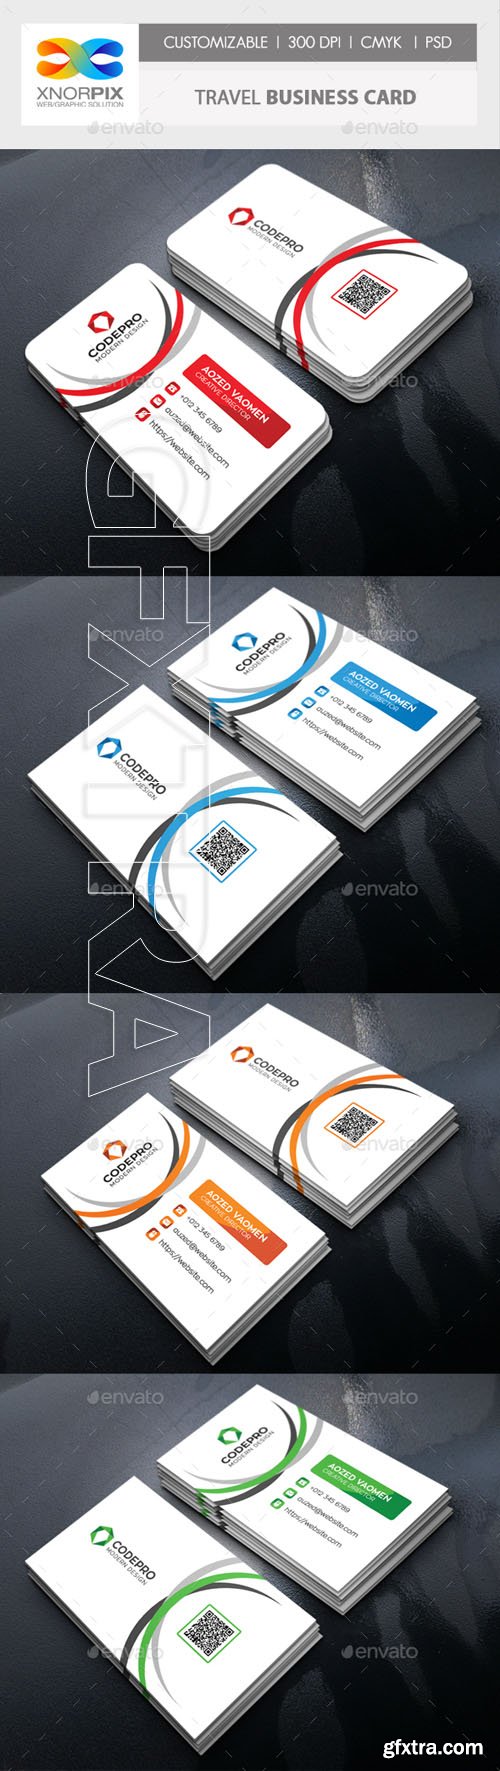 GraphicRiver - Travel Business Card 20446217